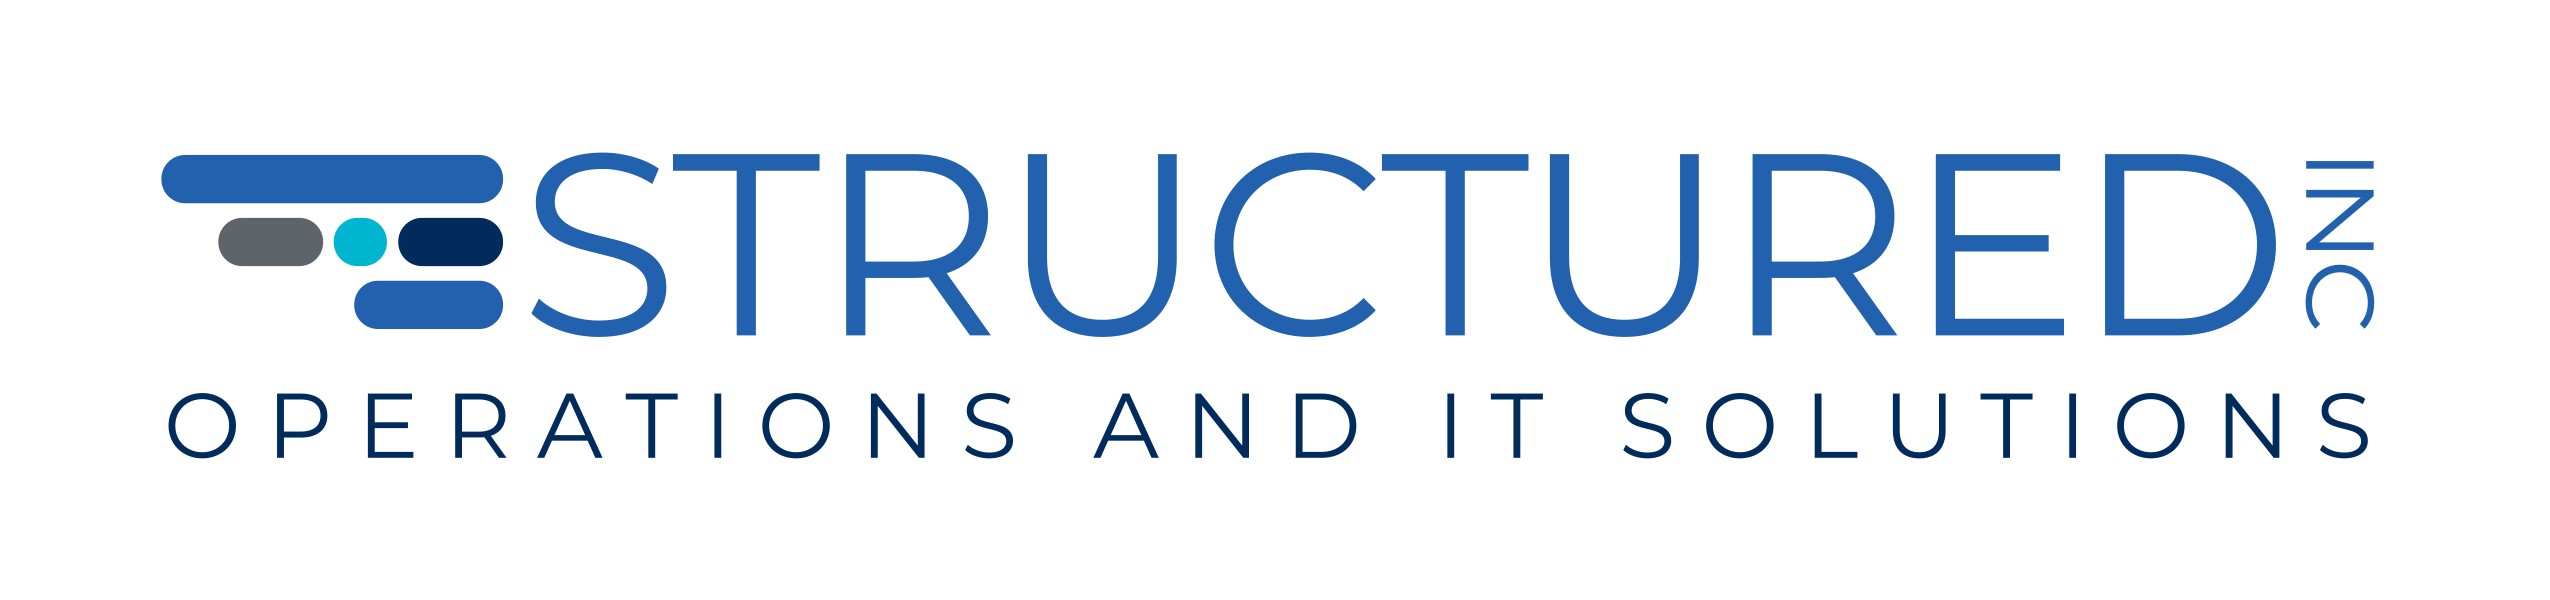 Structured, Inc.